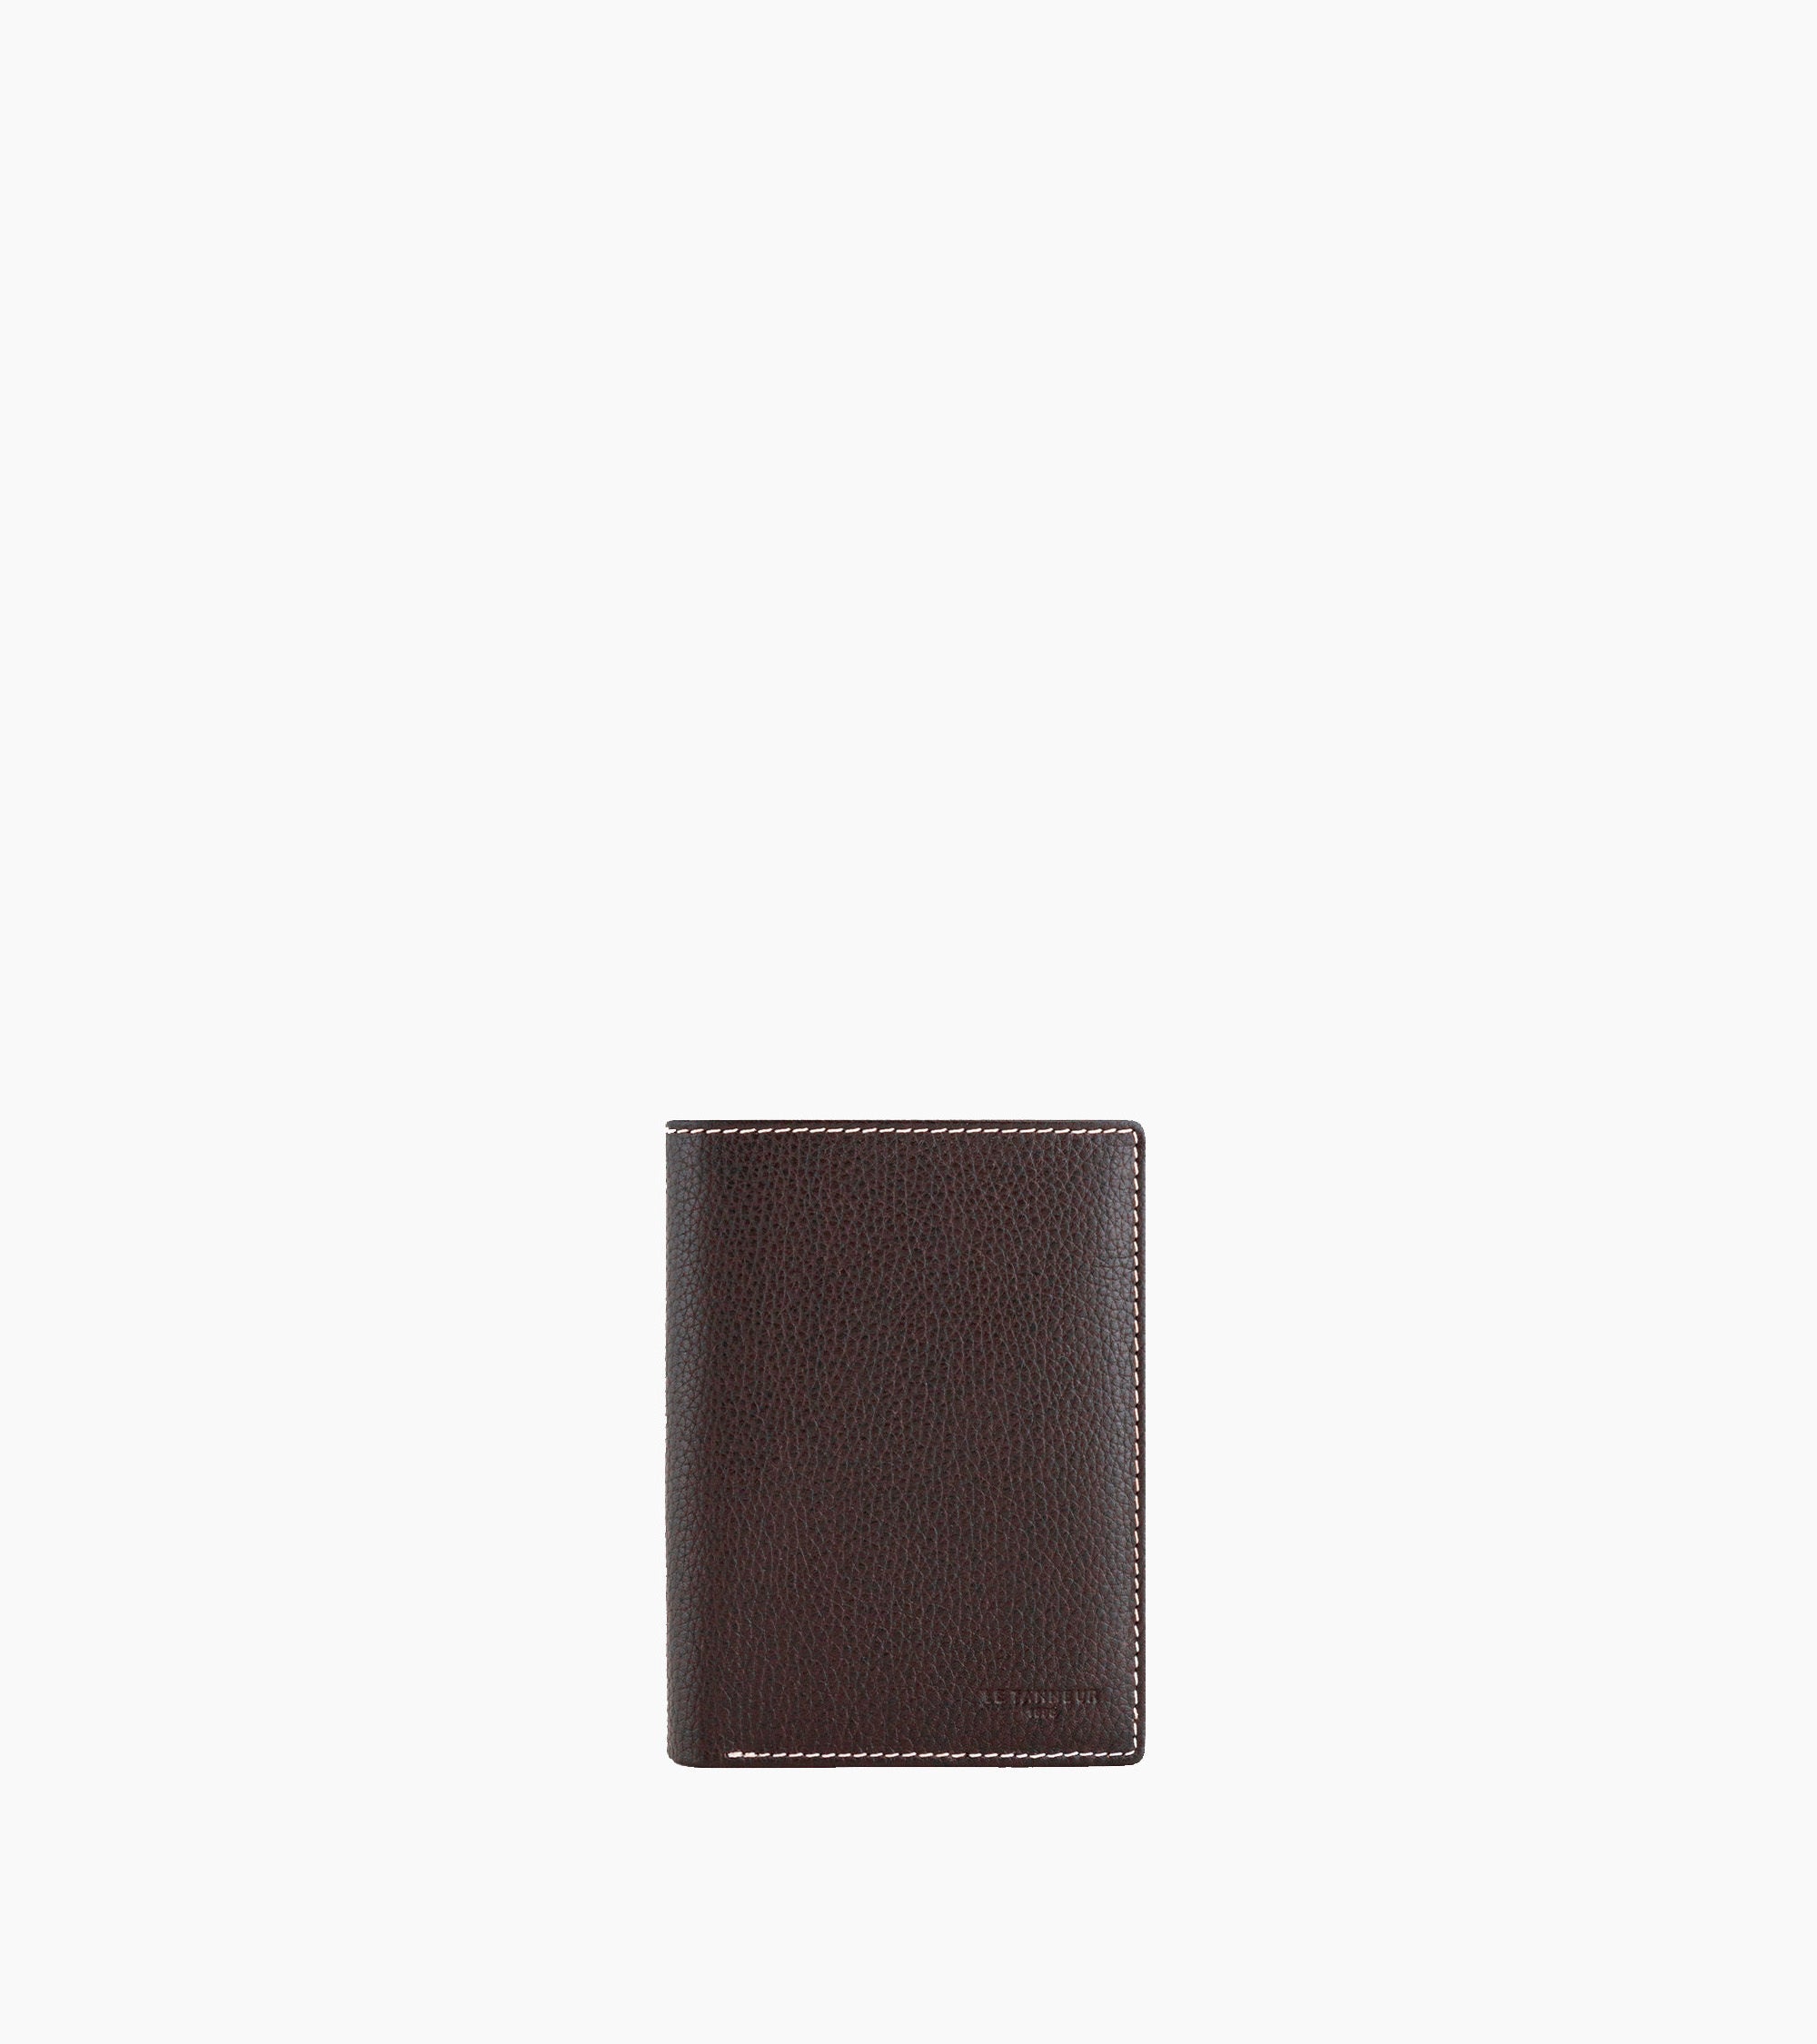 Charles medium-sized, zipped wallet with 2 gussets in grained leather